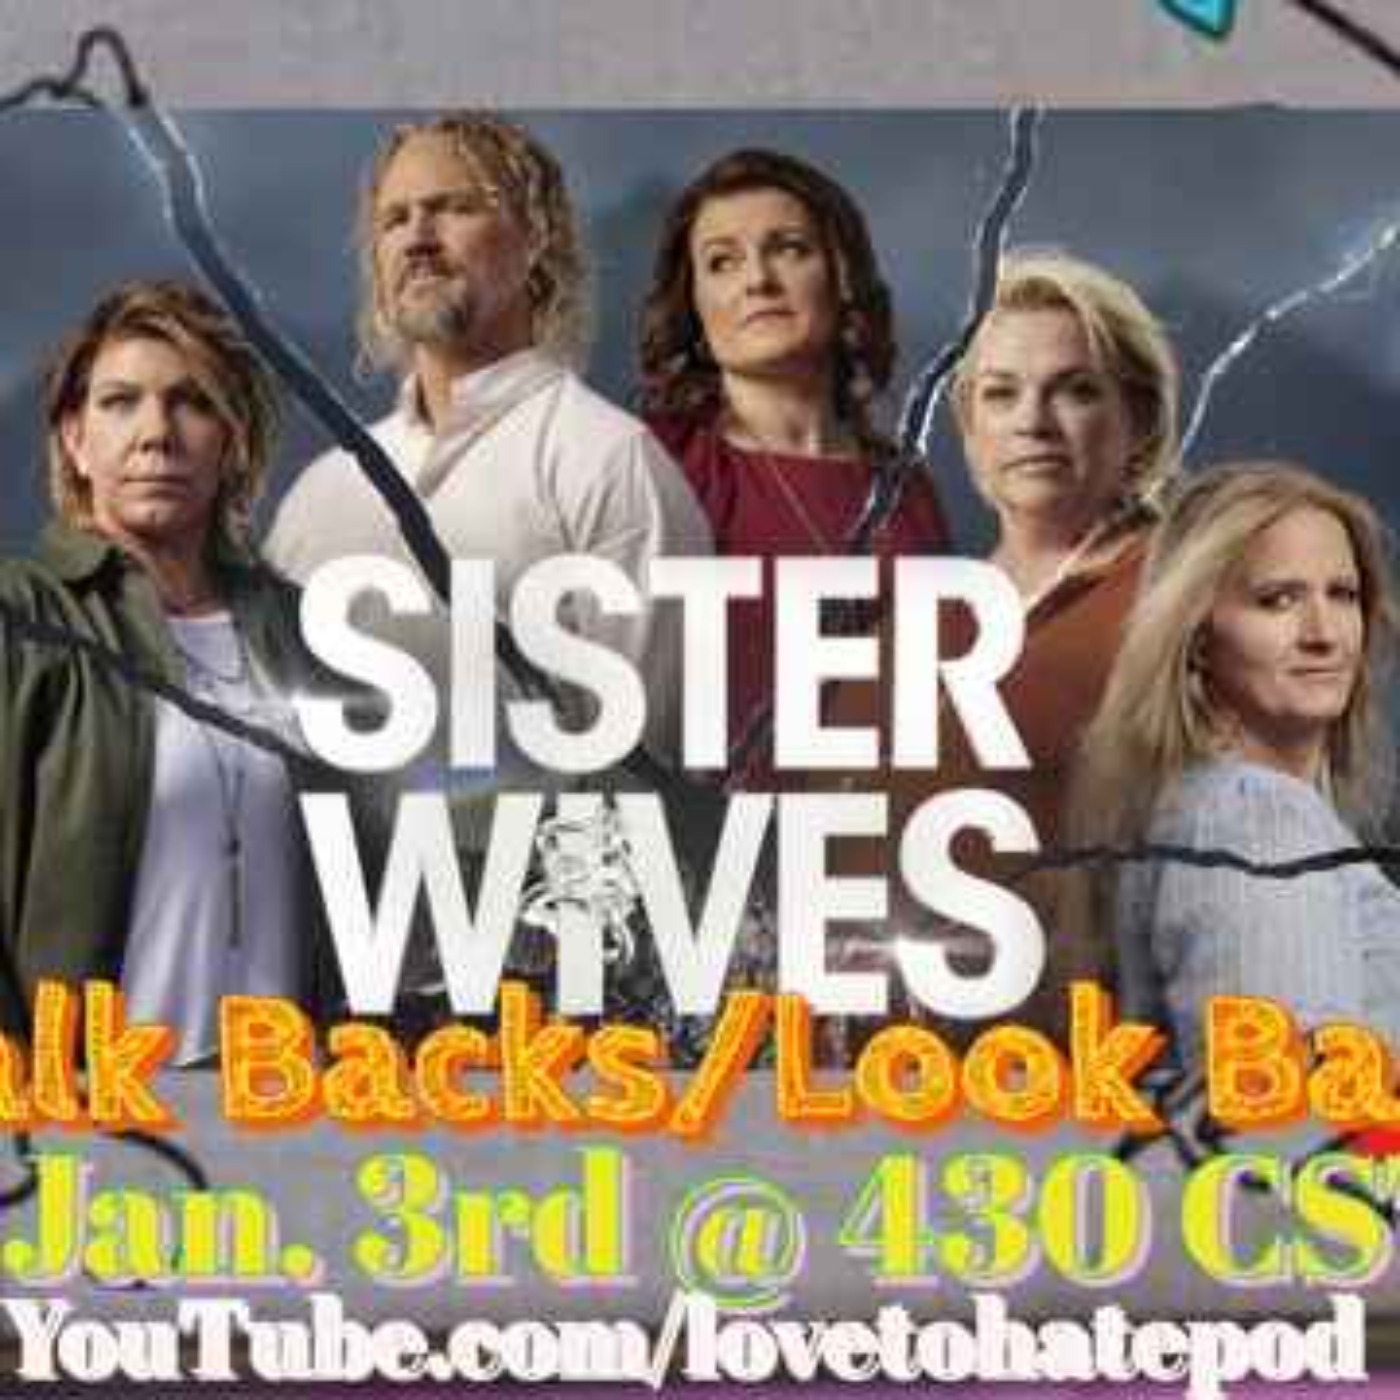 Sister Wives ”filler” episodes that turned our to be LITTTT! (Talk Backs and Look Backs)